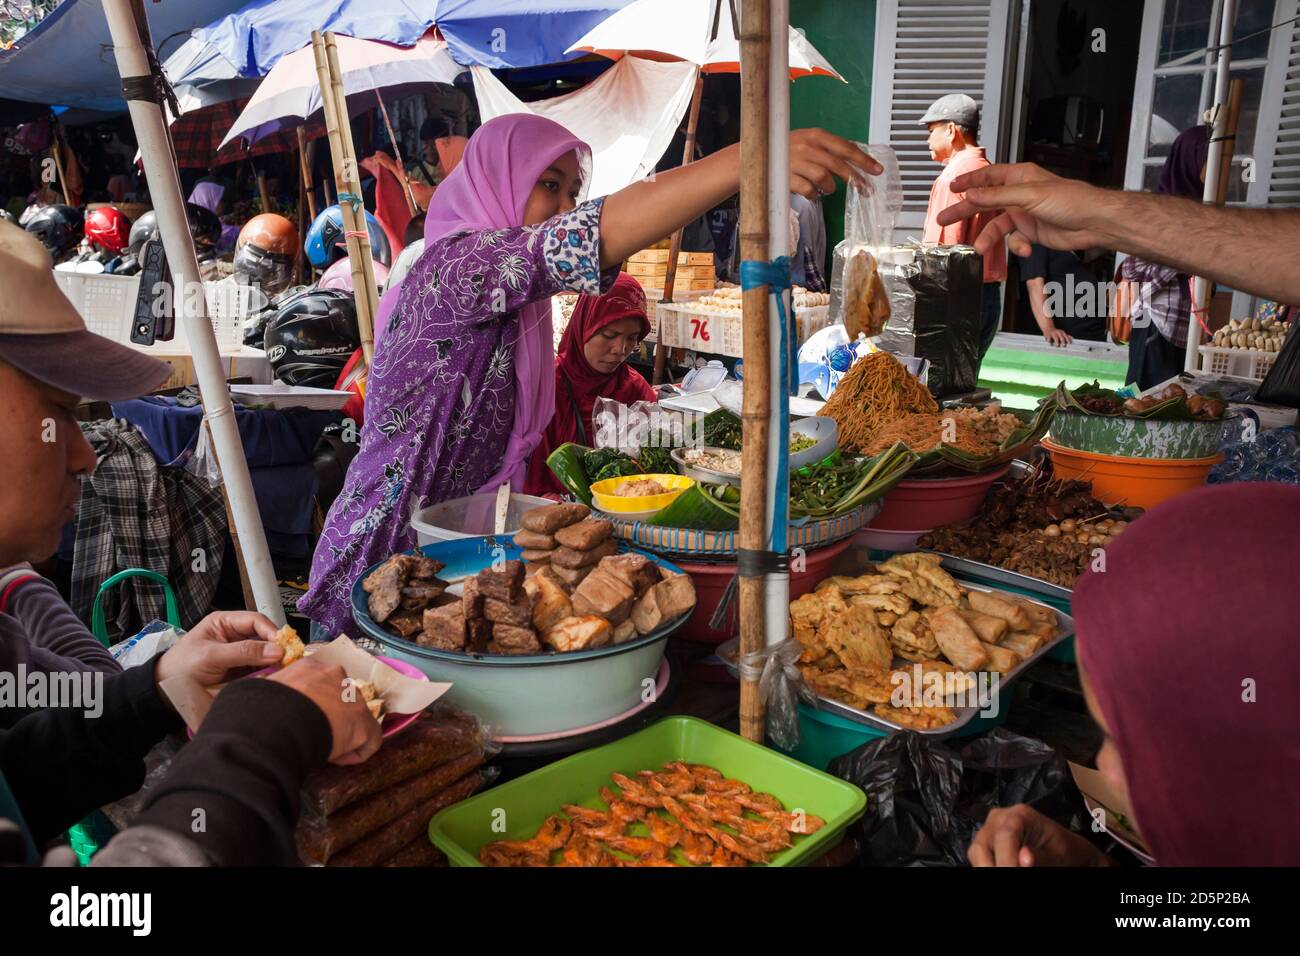 Horizontal view of a colorful food stall in Pasar Beringharjo, the oldest market in the Kraton area, Yogyakarta, Java, Indonesia Stock Photo